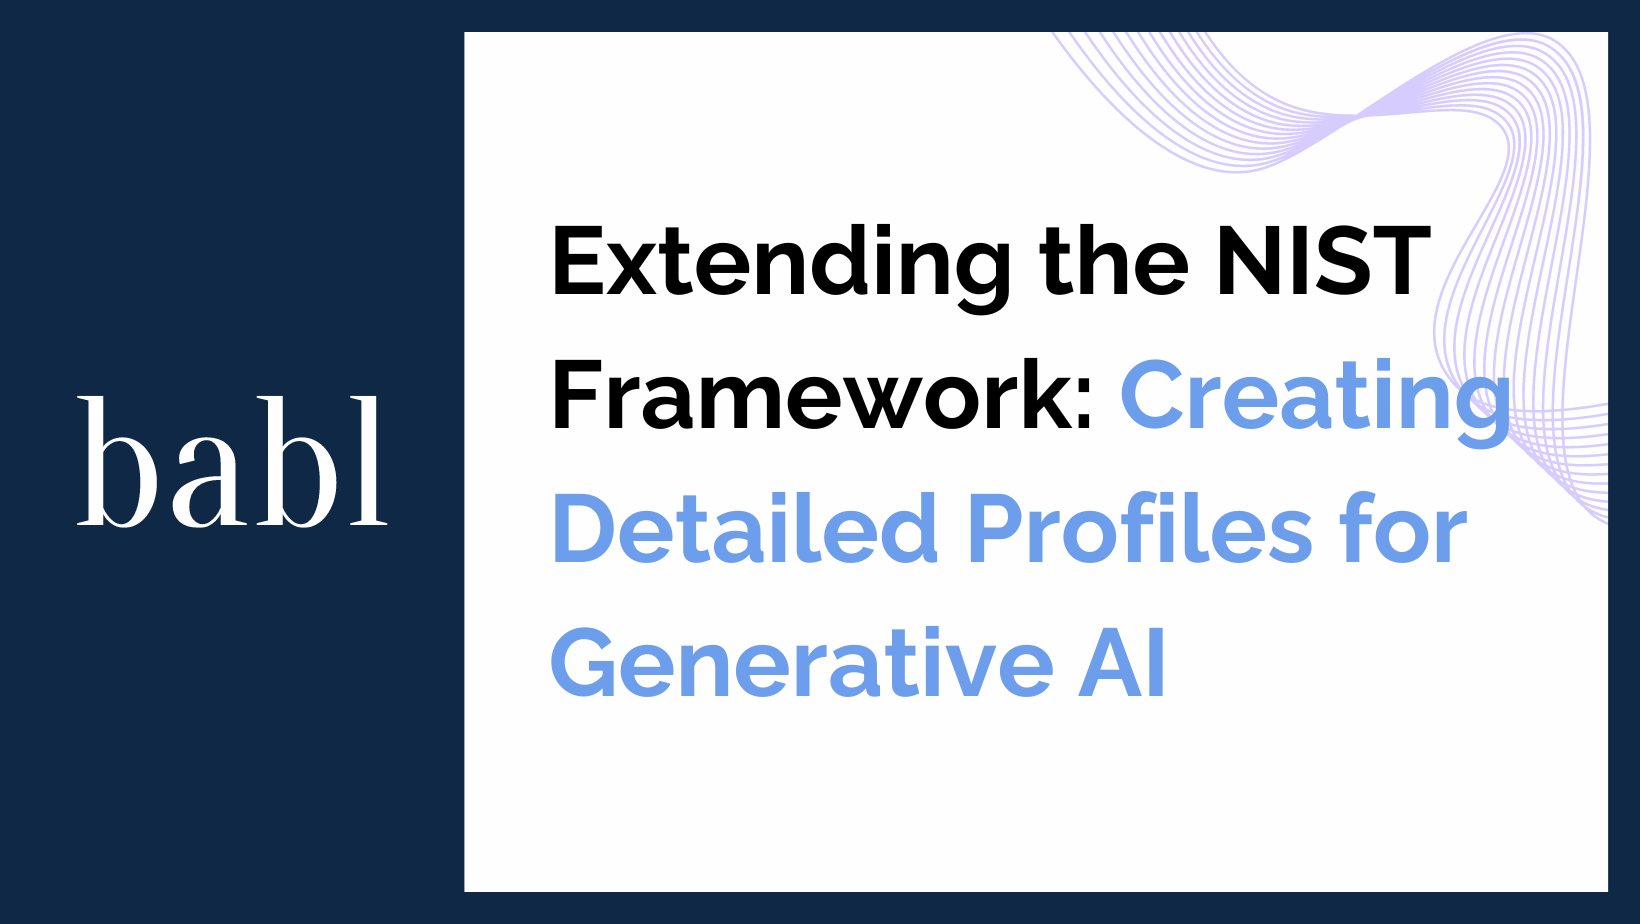 Extending the NIST Framework: Creating Detailed Profiles for Generative AI